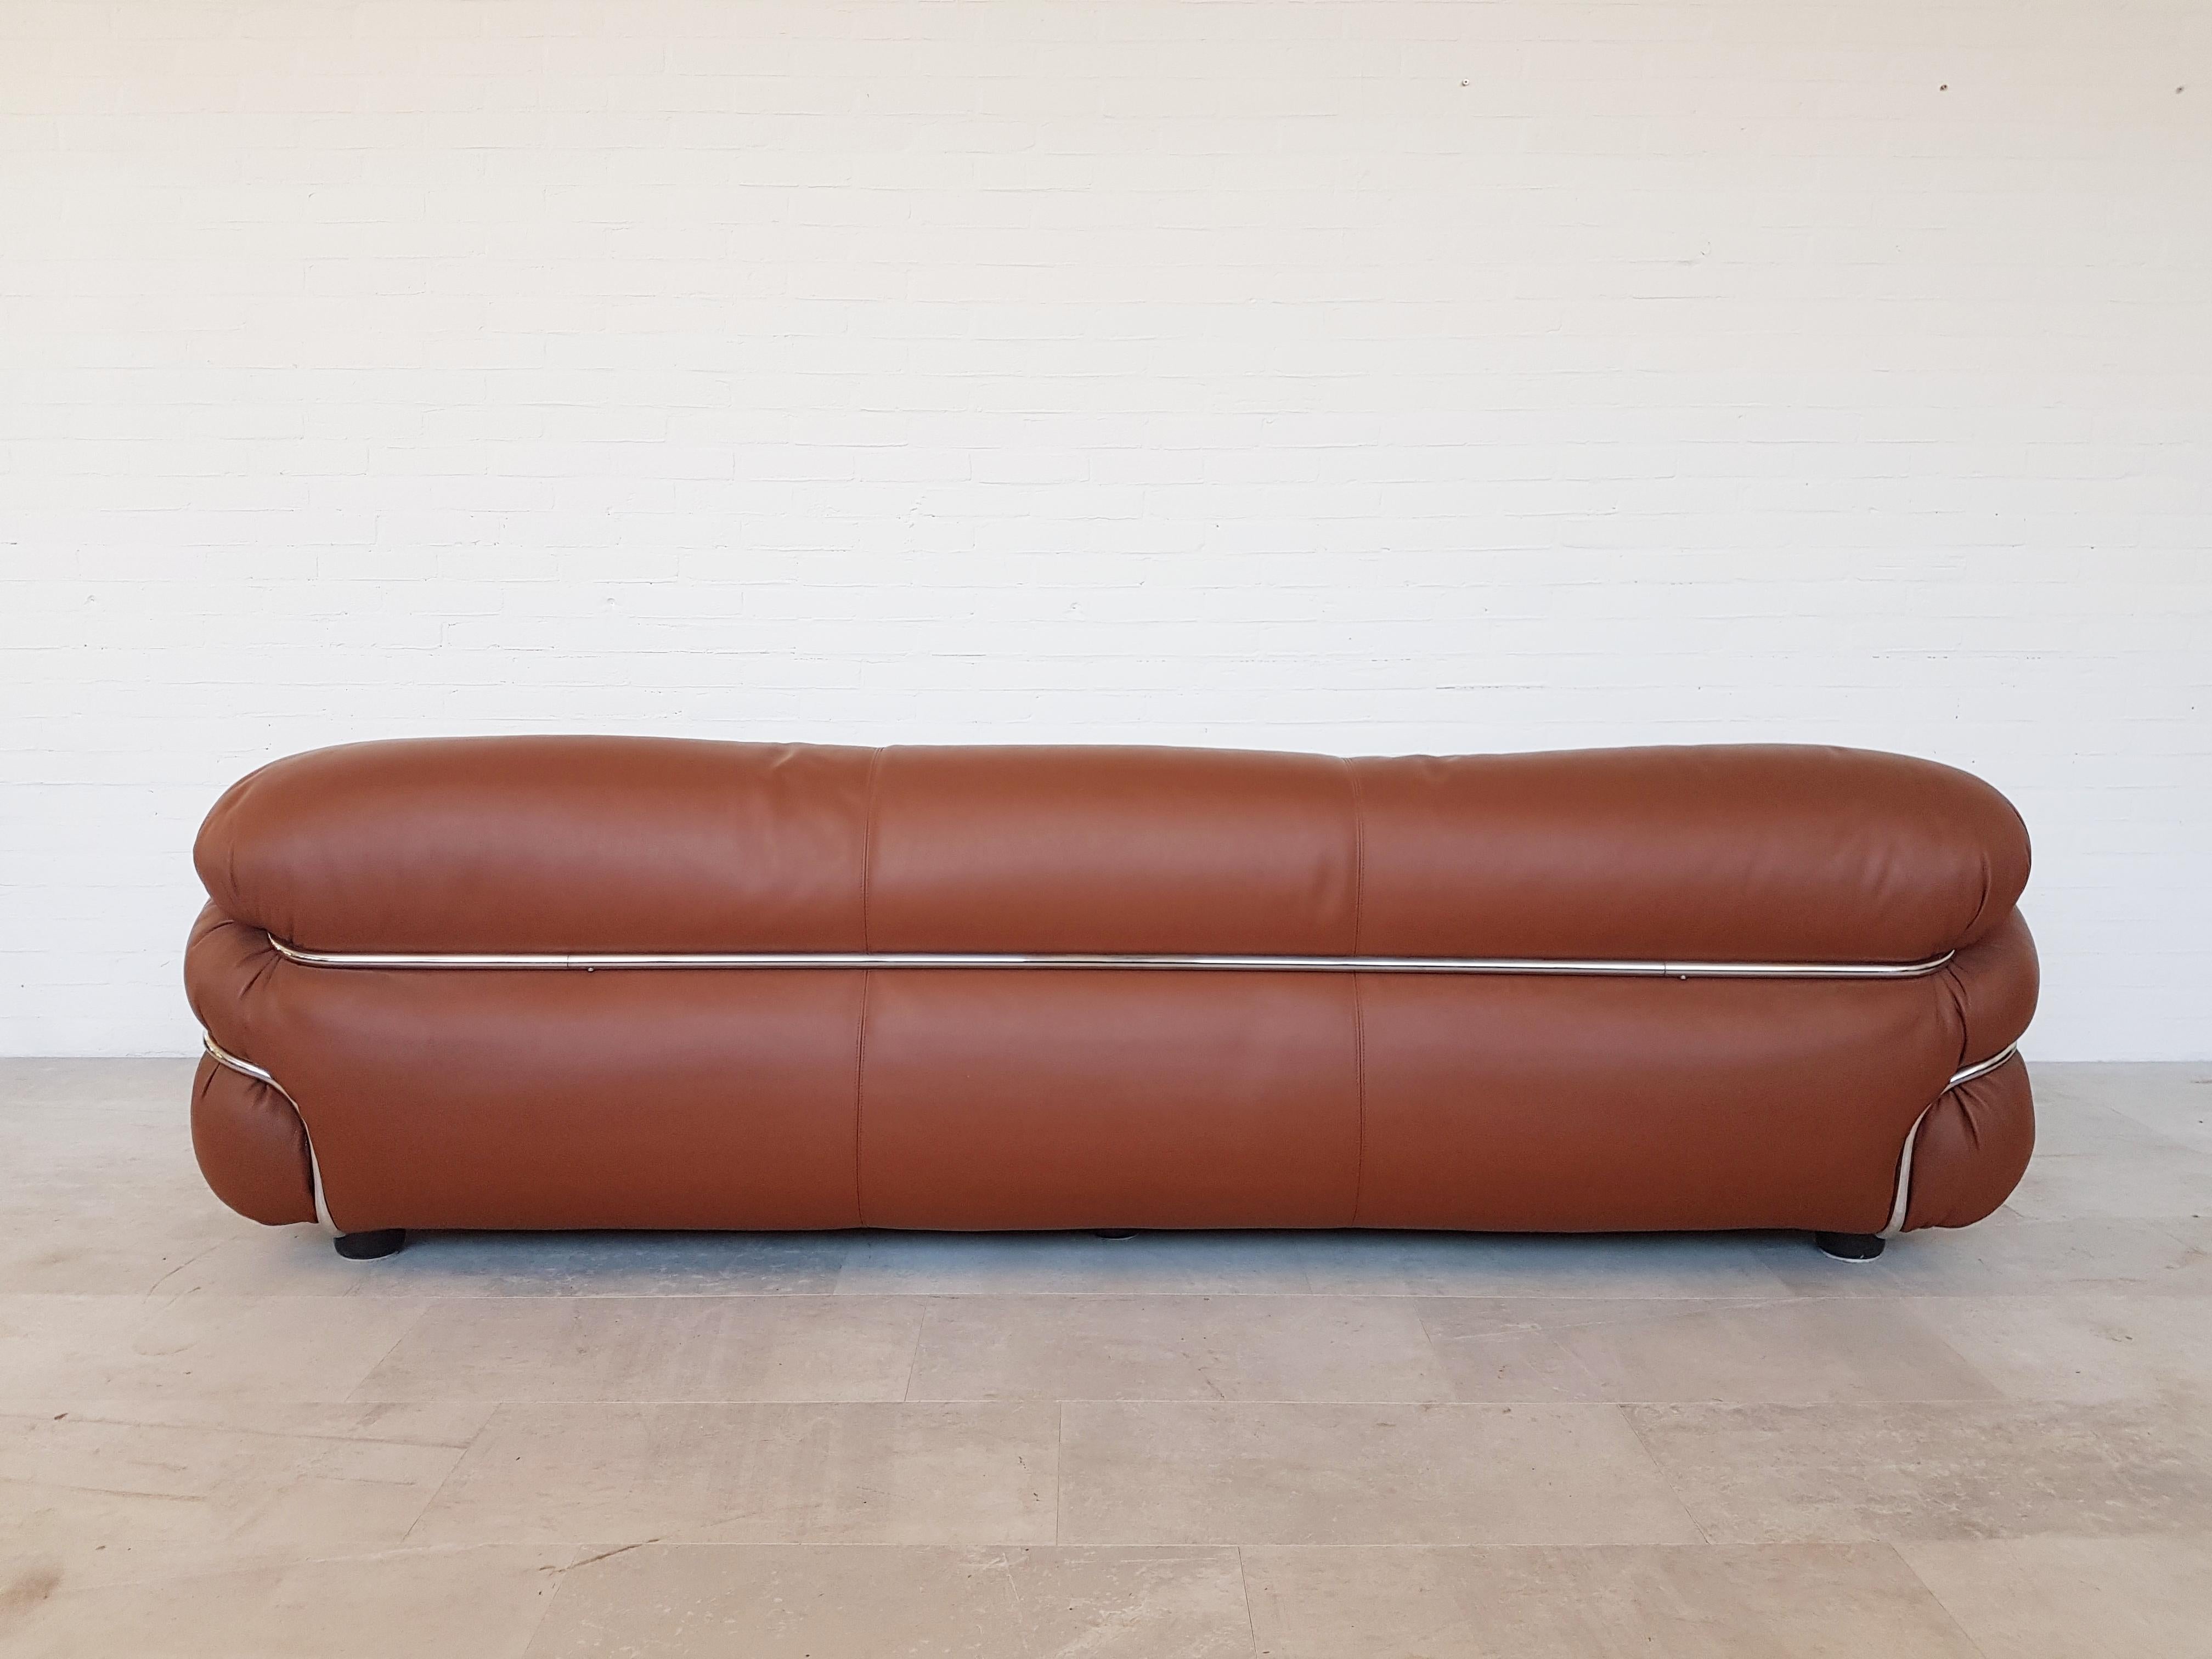 Gianfranco Frattini designed this awesome Space Age piece in the 1970s for Cassina.
A three-seat sofa in cognac / whiskey colored leather and a chrome frame.
Would fit well in a mad men inspired interior.